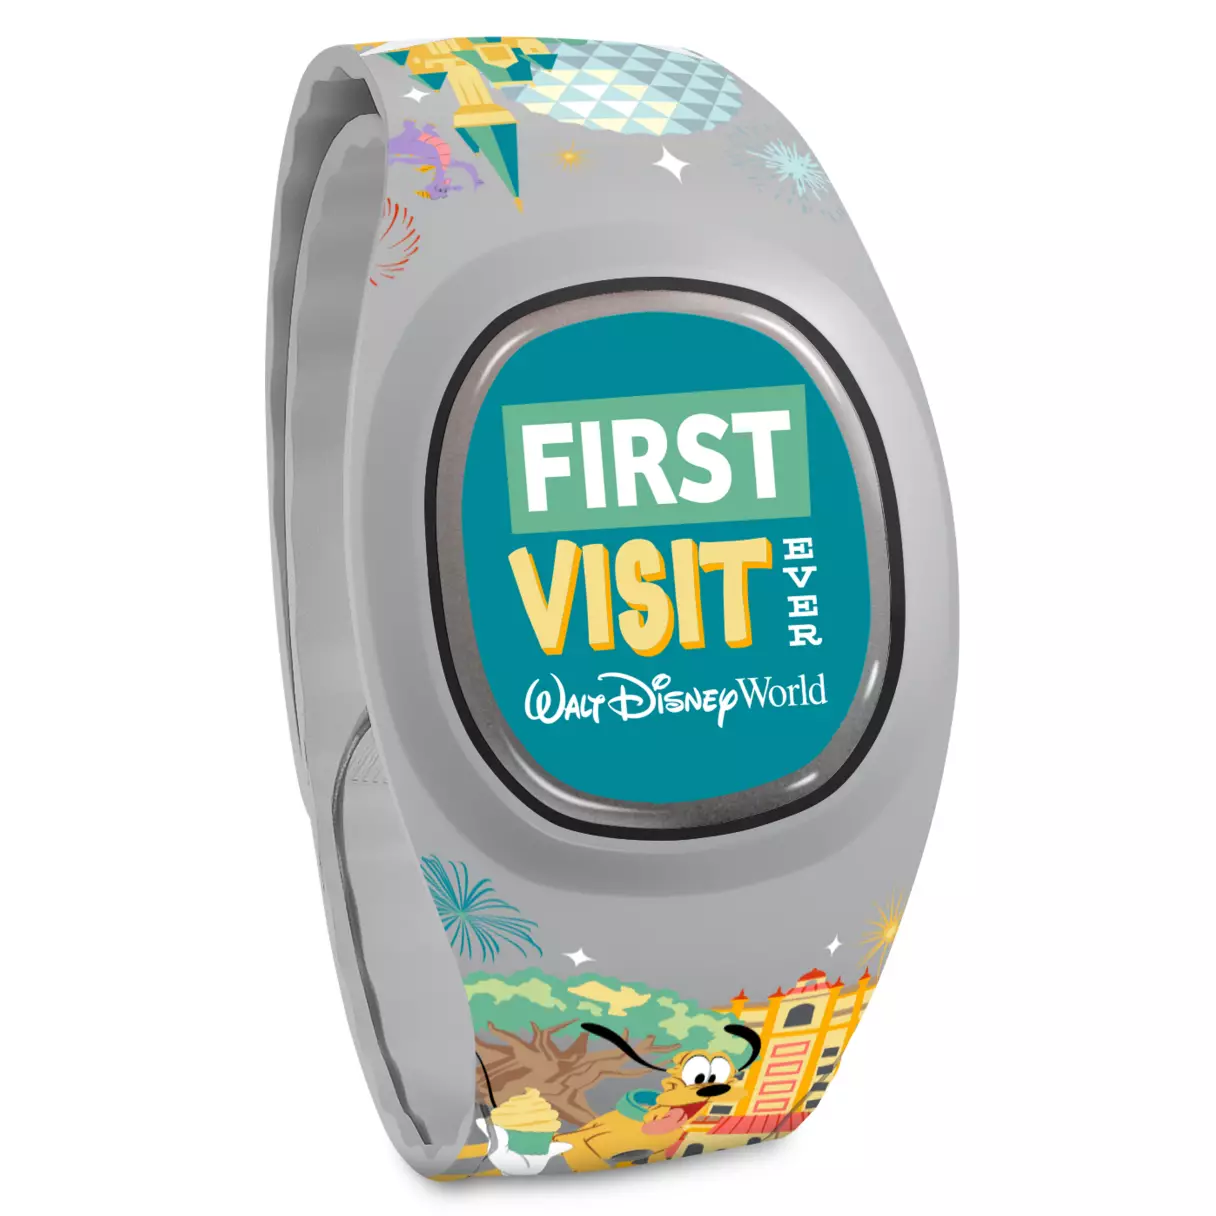 Disney World First Visit Ever MagicBand+ - Disney World Packing Guide